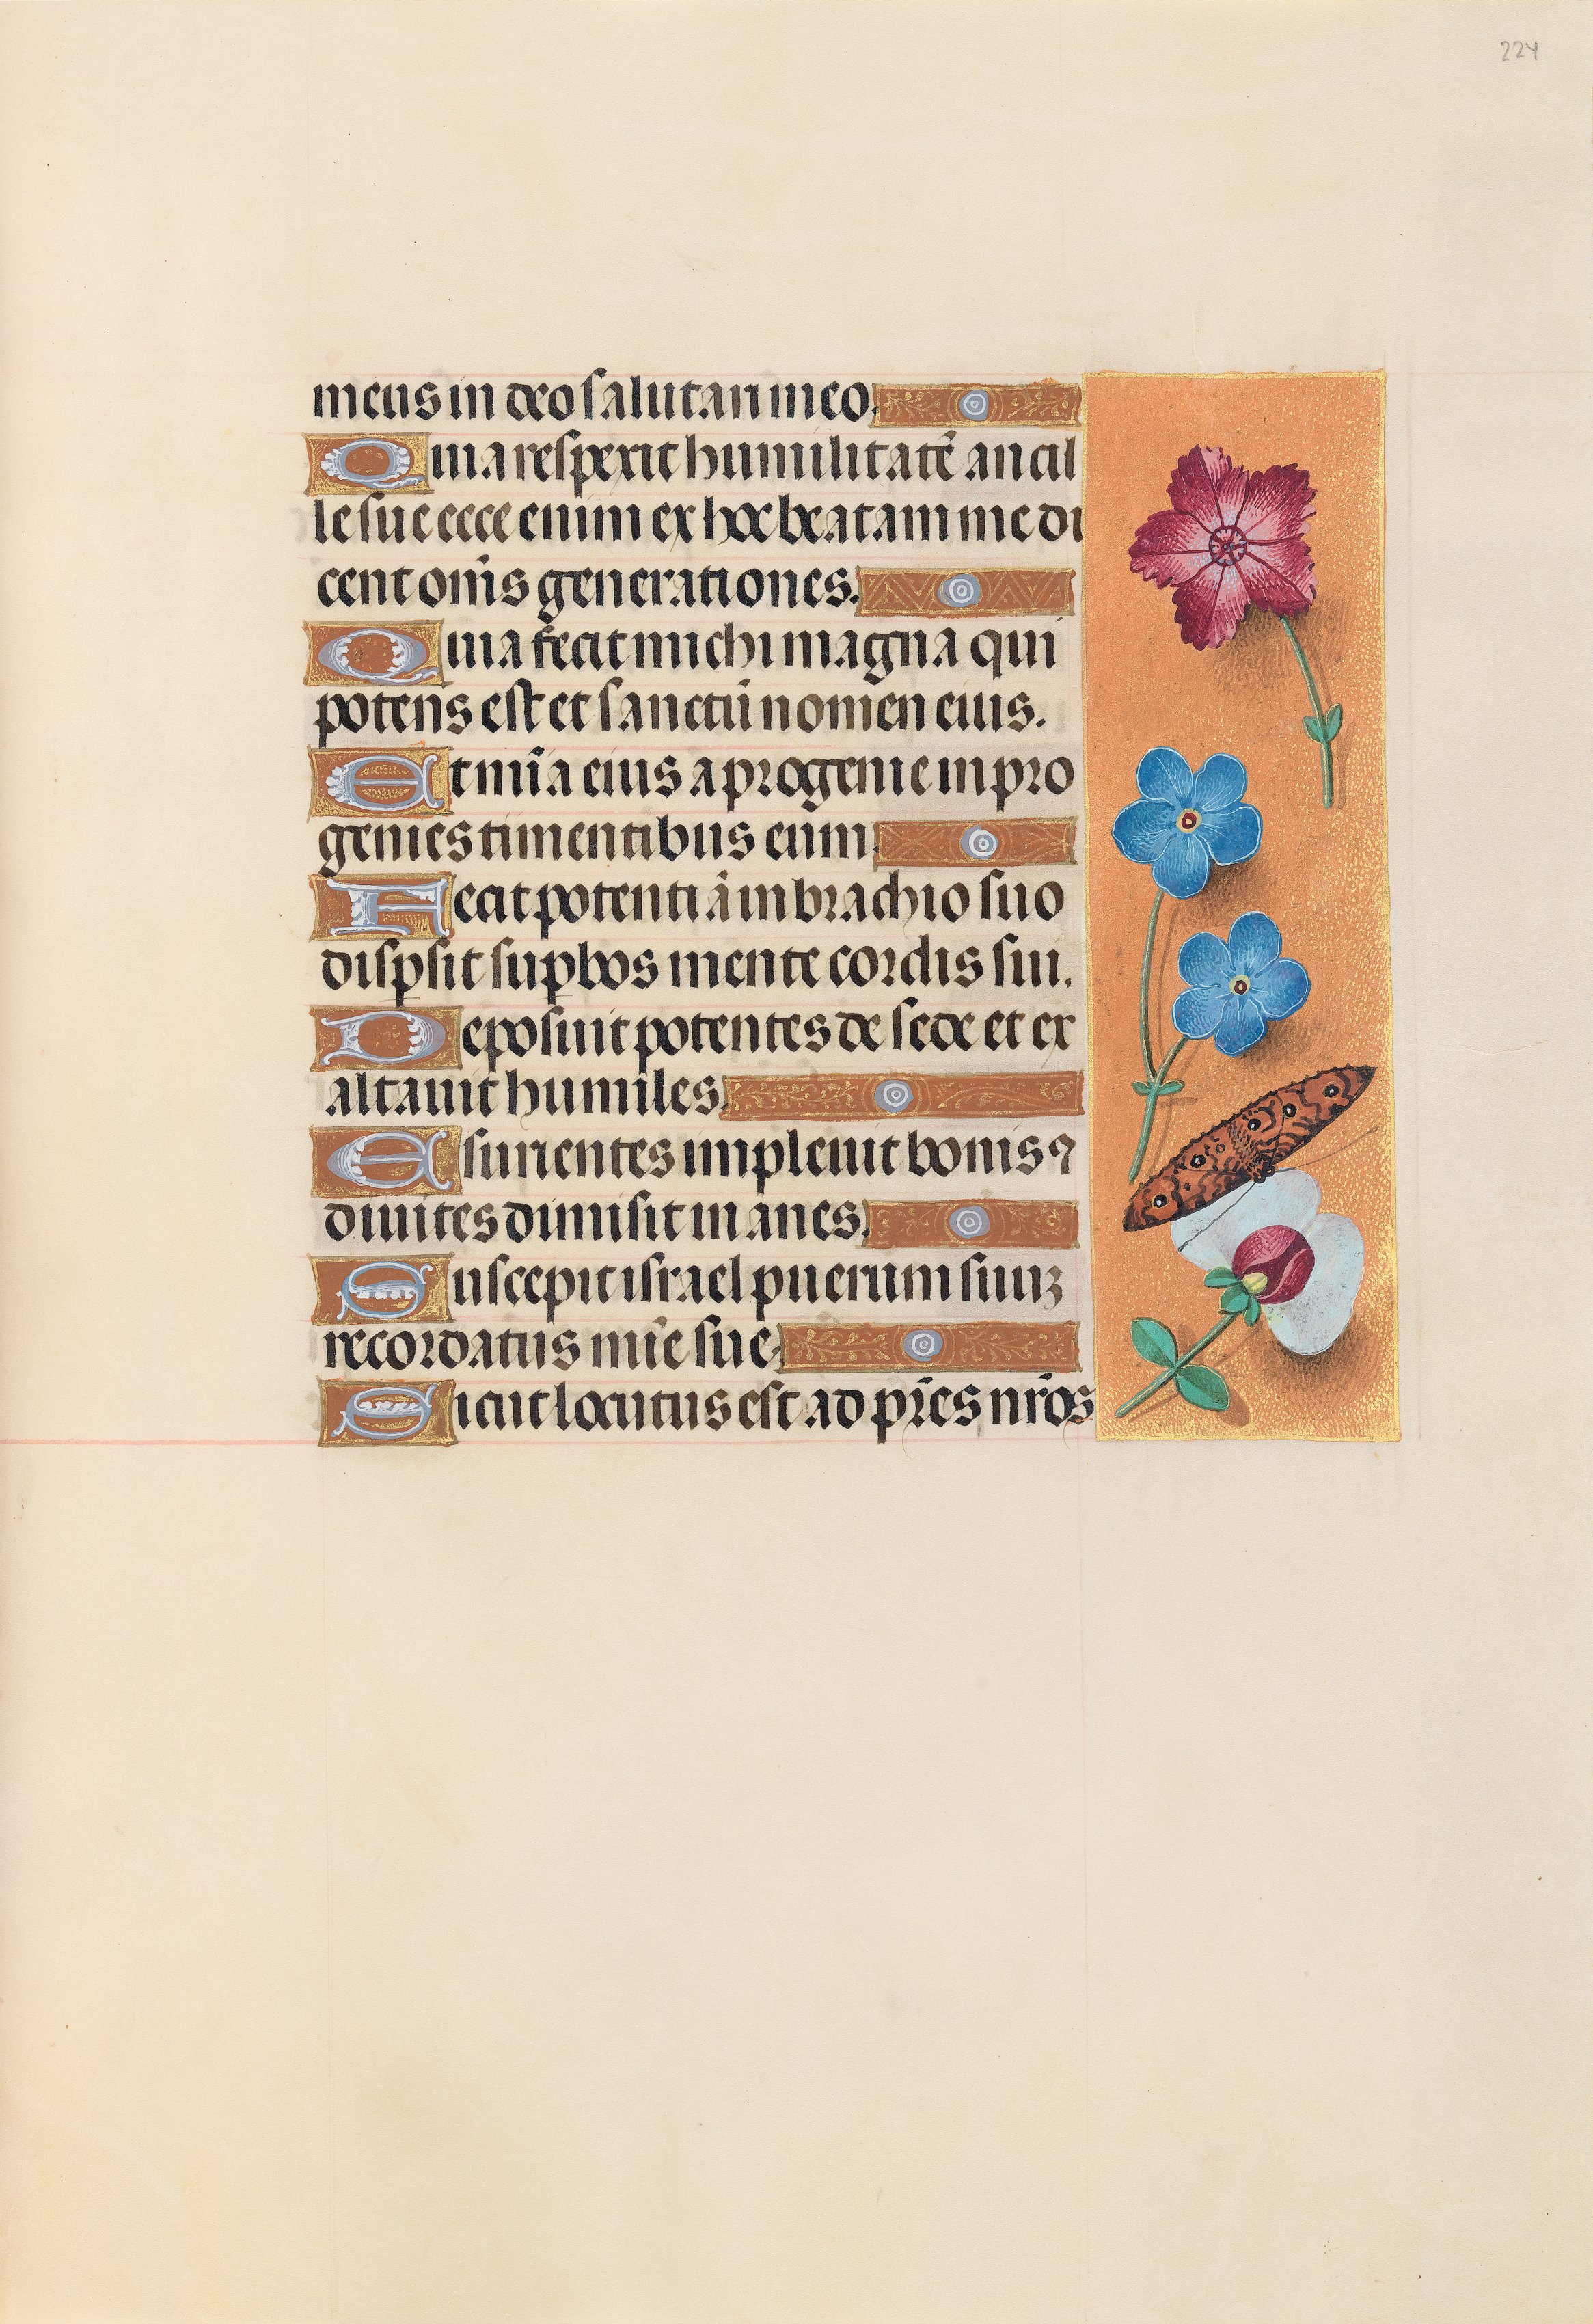 Hours of Queen Isabella the Catholic, Queen of Spain:  Fol. 224r